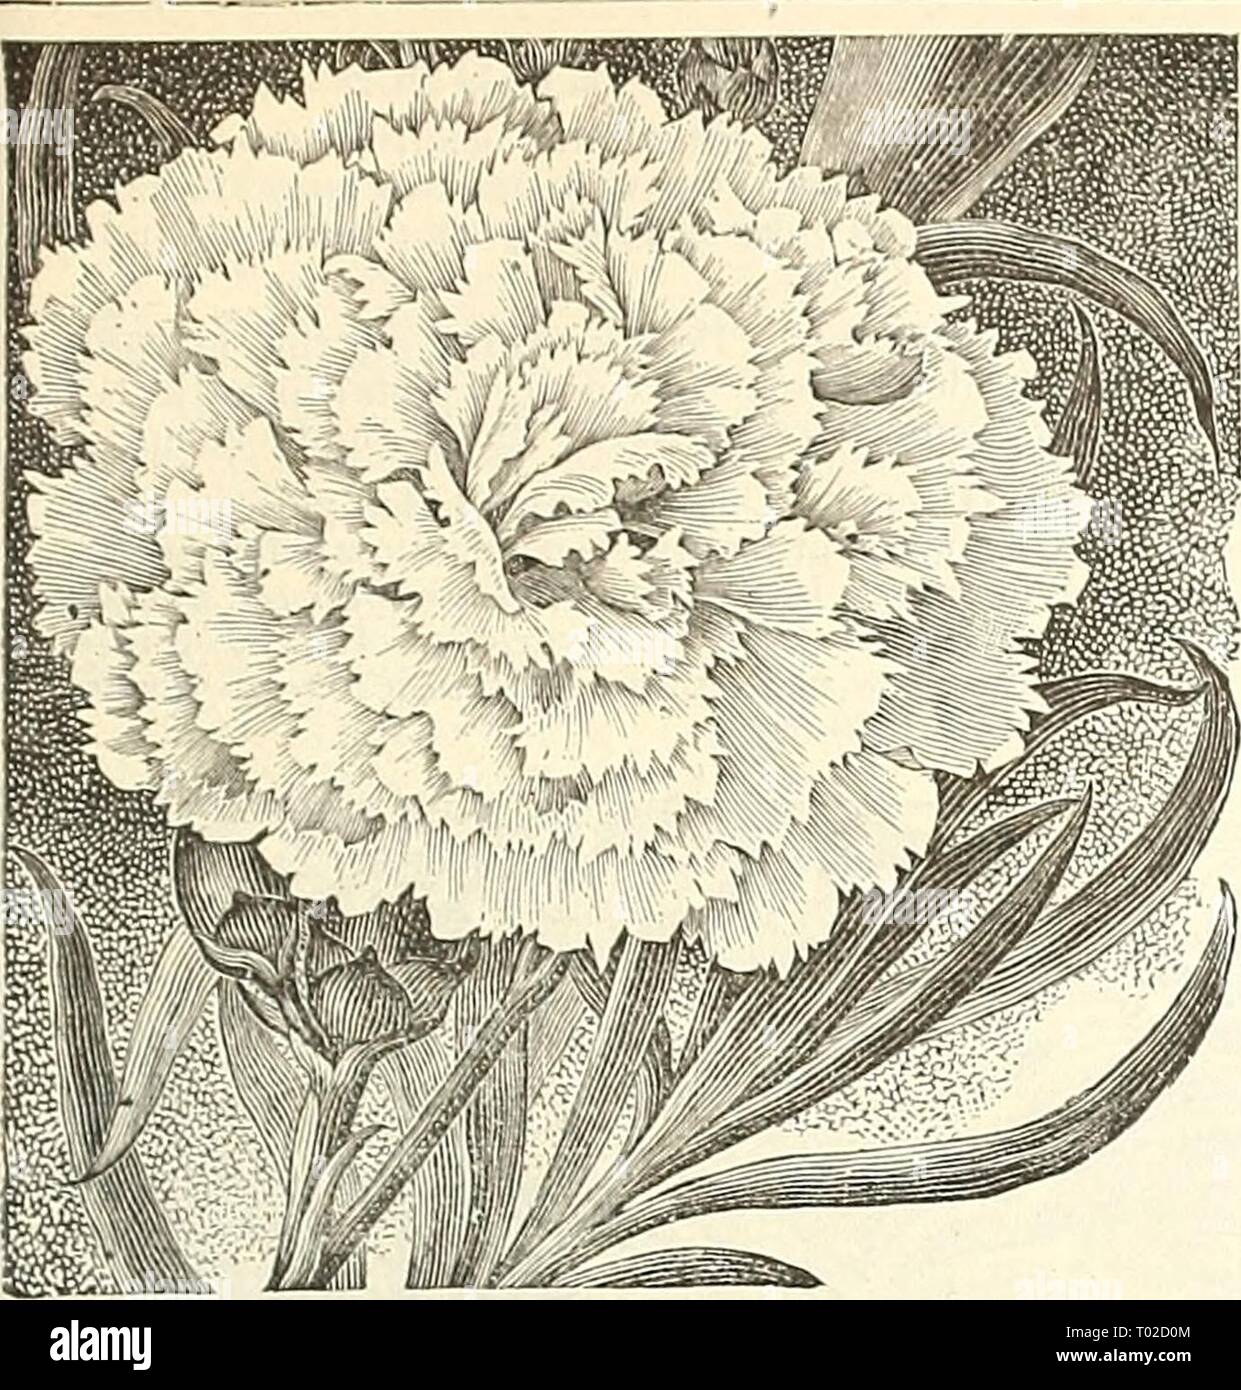 Dreer's garden calendar : 1891 . dreersgardencale1891henr Year: 1891  FOR GARDEN AND GREENHOUSE. 103    Wm. Swavne. CARNATION S-Contimied. L. Lamborn. A dwarf, compact grower, bearing on long stems fine, waxy, white flowers; a profuse bloomer and can be grown on low benches. Mrs. Carnegie. White, delicately pencilled and laced with rosy carmine, finely fringed; a good strong grower. Pride of Keiiiiett. Color rich crimson, similar to the .Jacqueminot rose; it is a strong, vigorous grower and a ])rofuse bloomer. Sunrise. Light buff, flaked with bright red; flowers large, good shape ; fragrant an Stock Photo